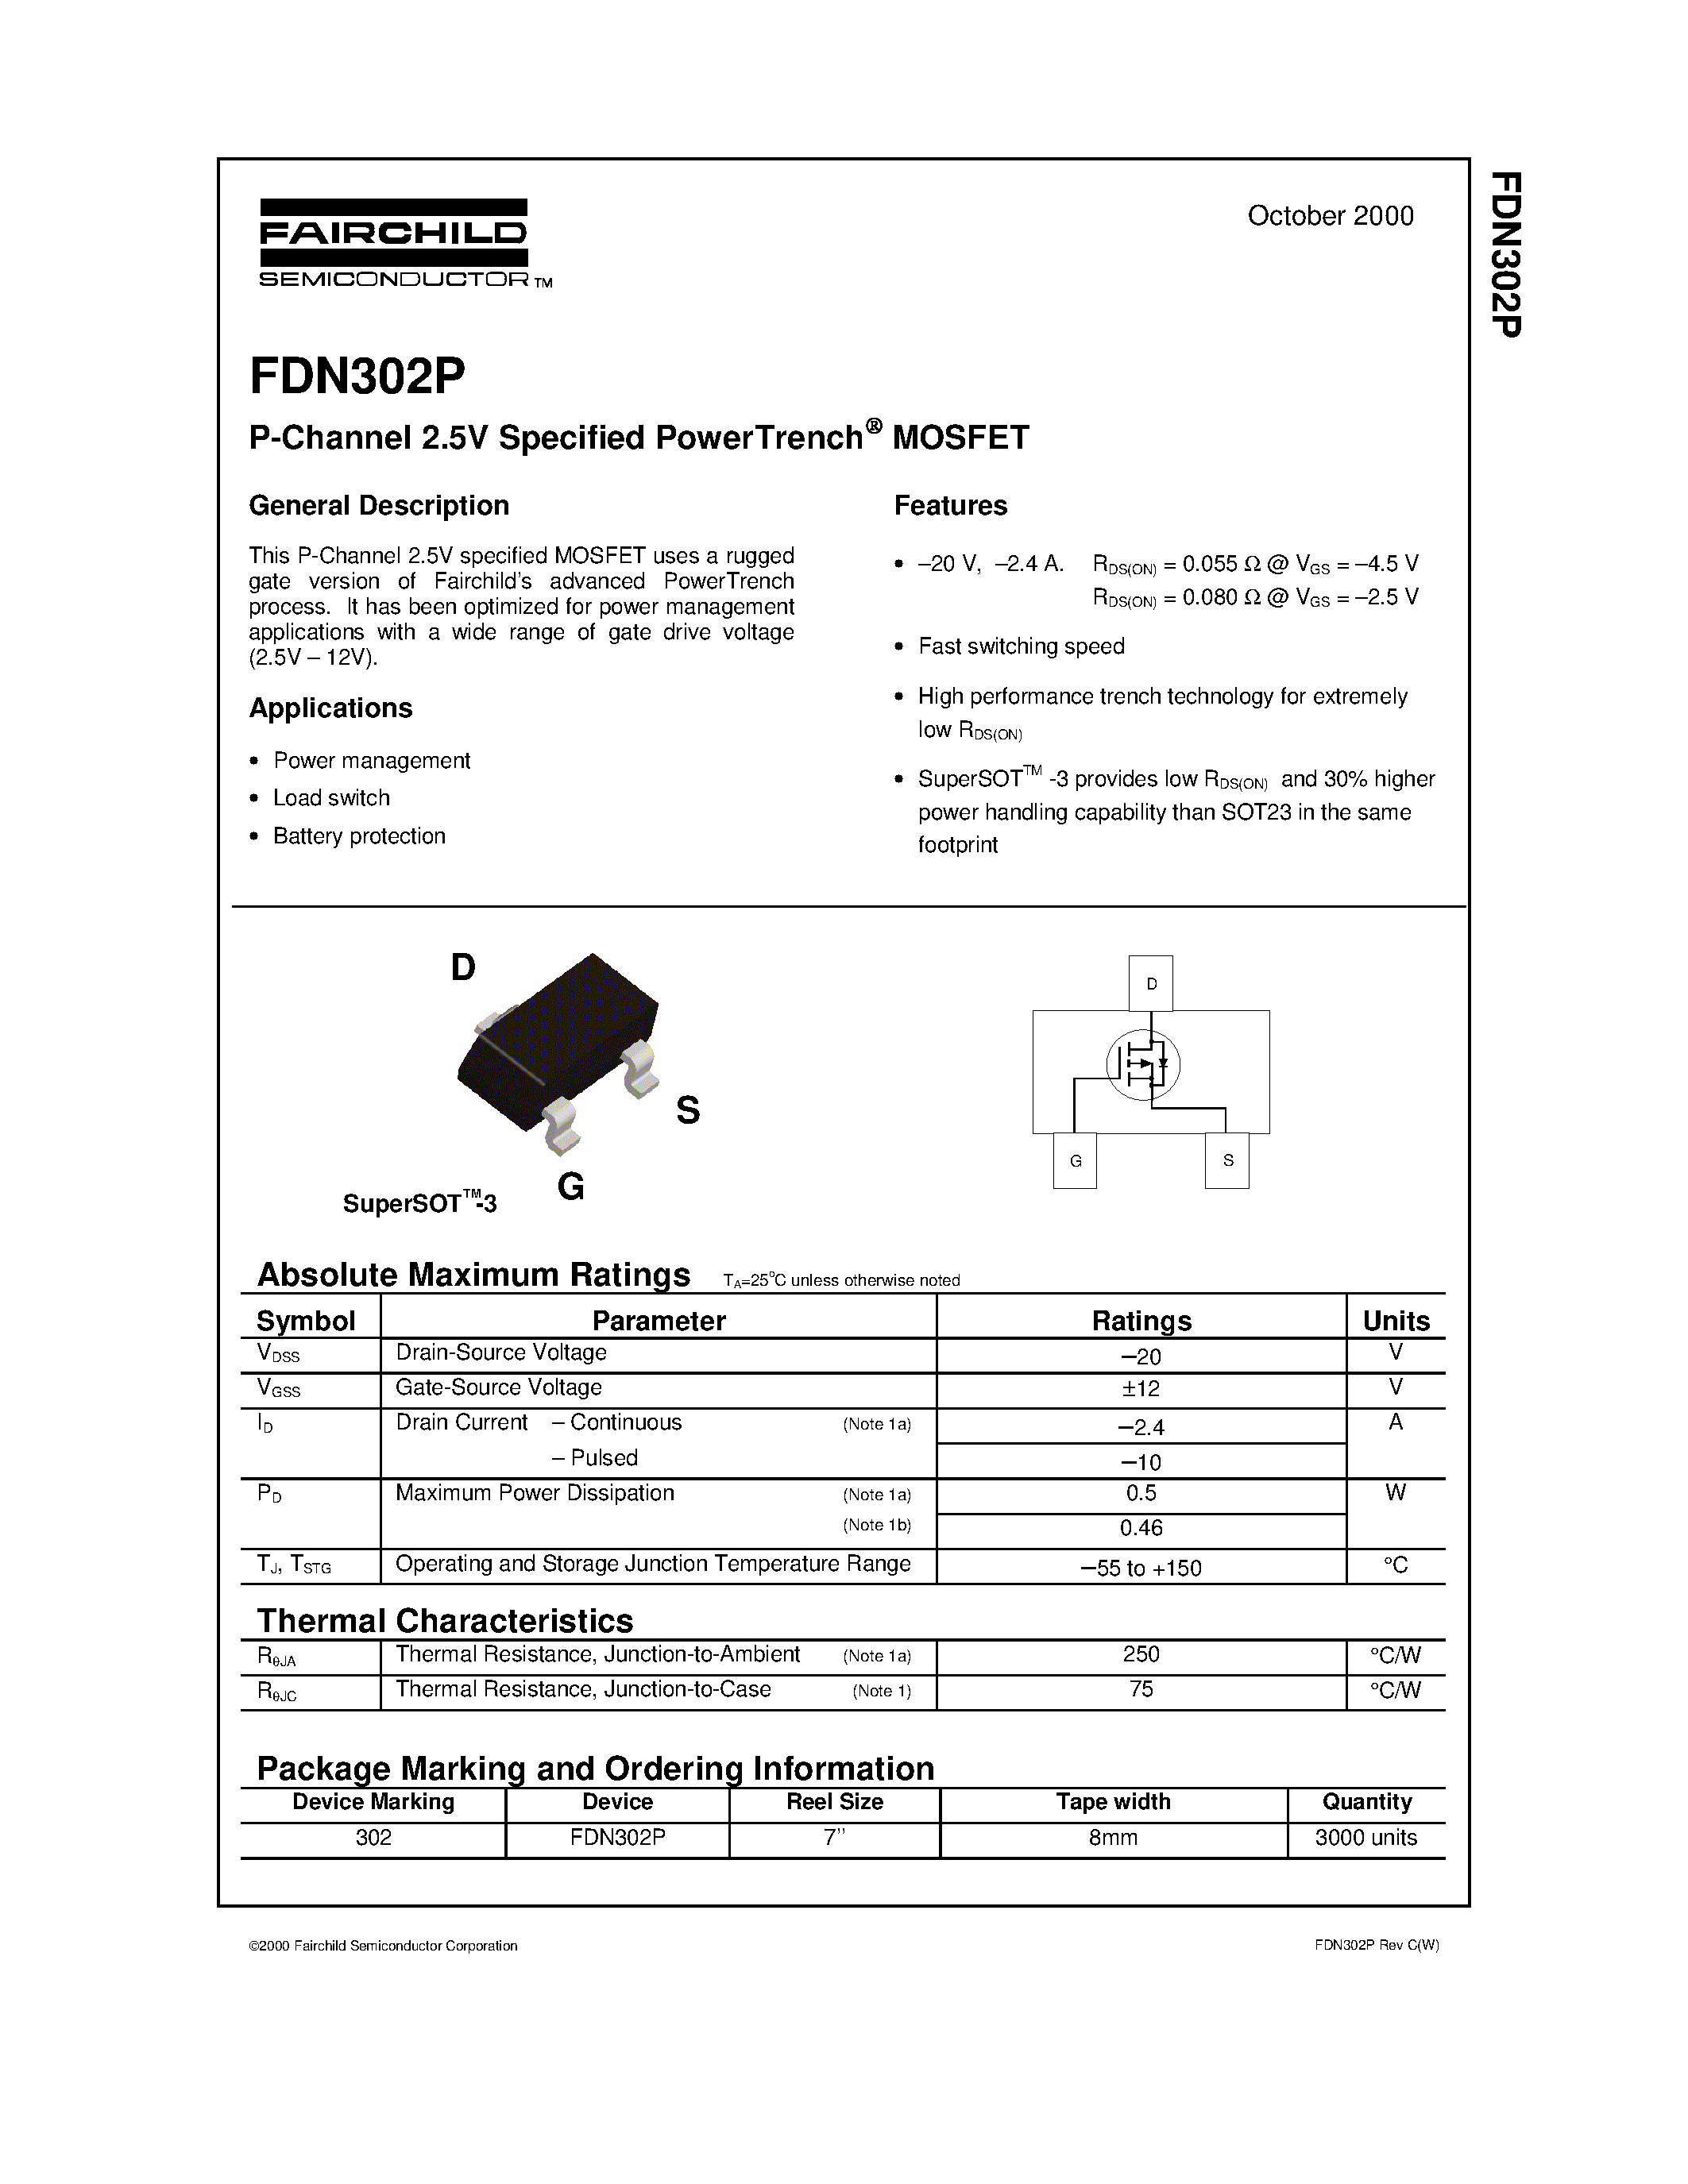 Datasheet FDN302 - P-Channel 2.5V Specified PowerTrench MOSFET page 1